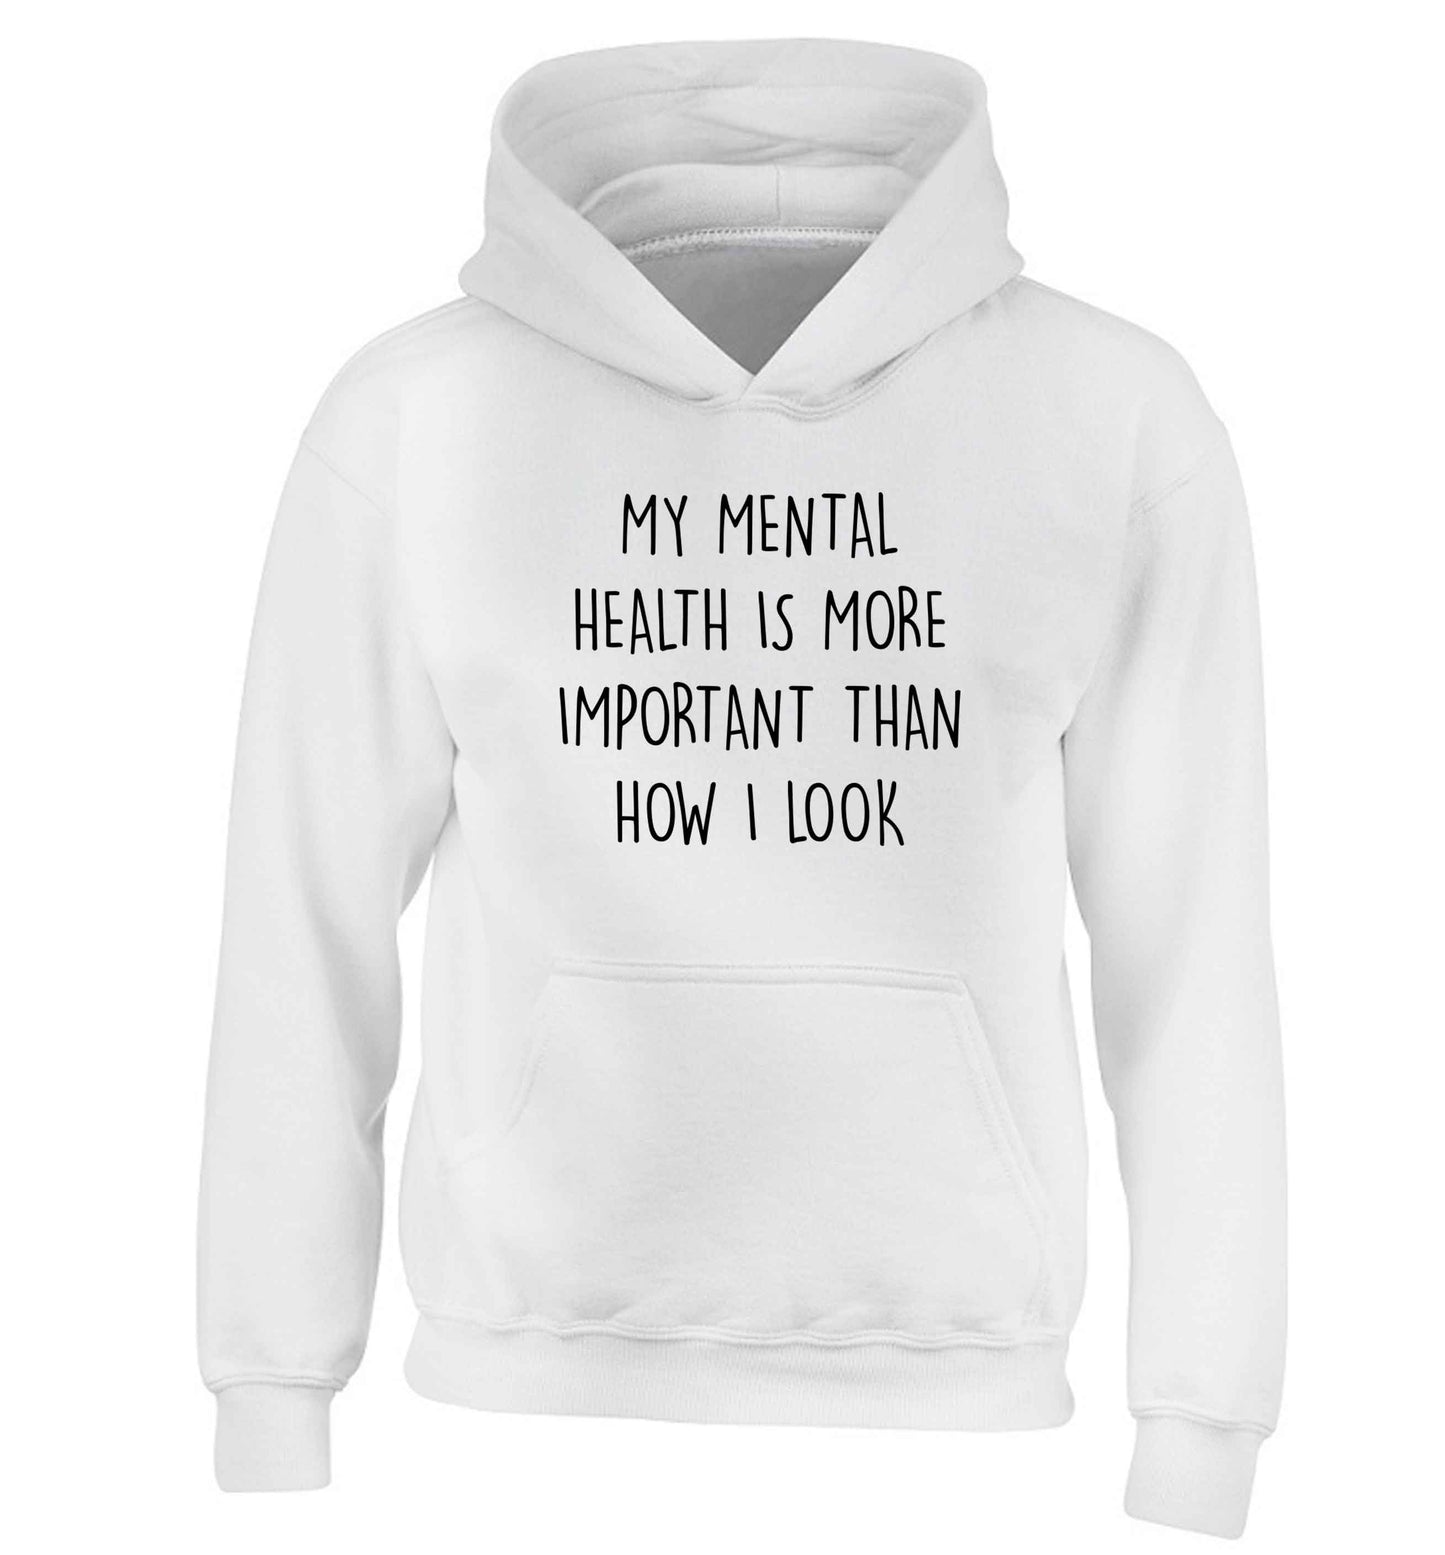 My mental health is more importnat than how I look children's white hoodie 12-13 Years